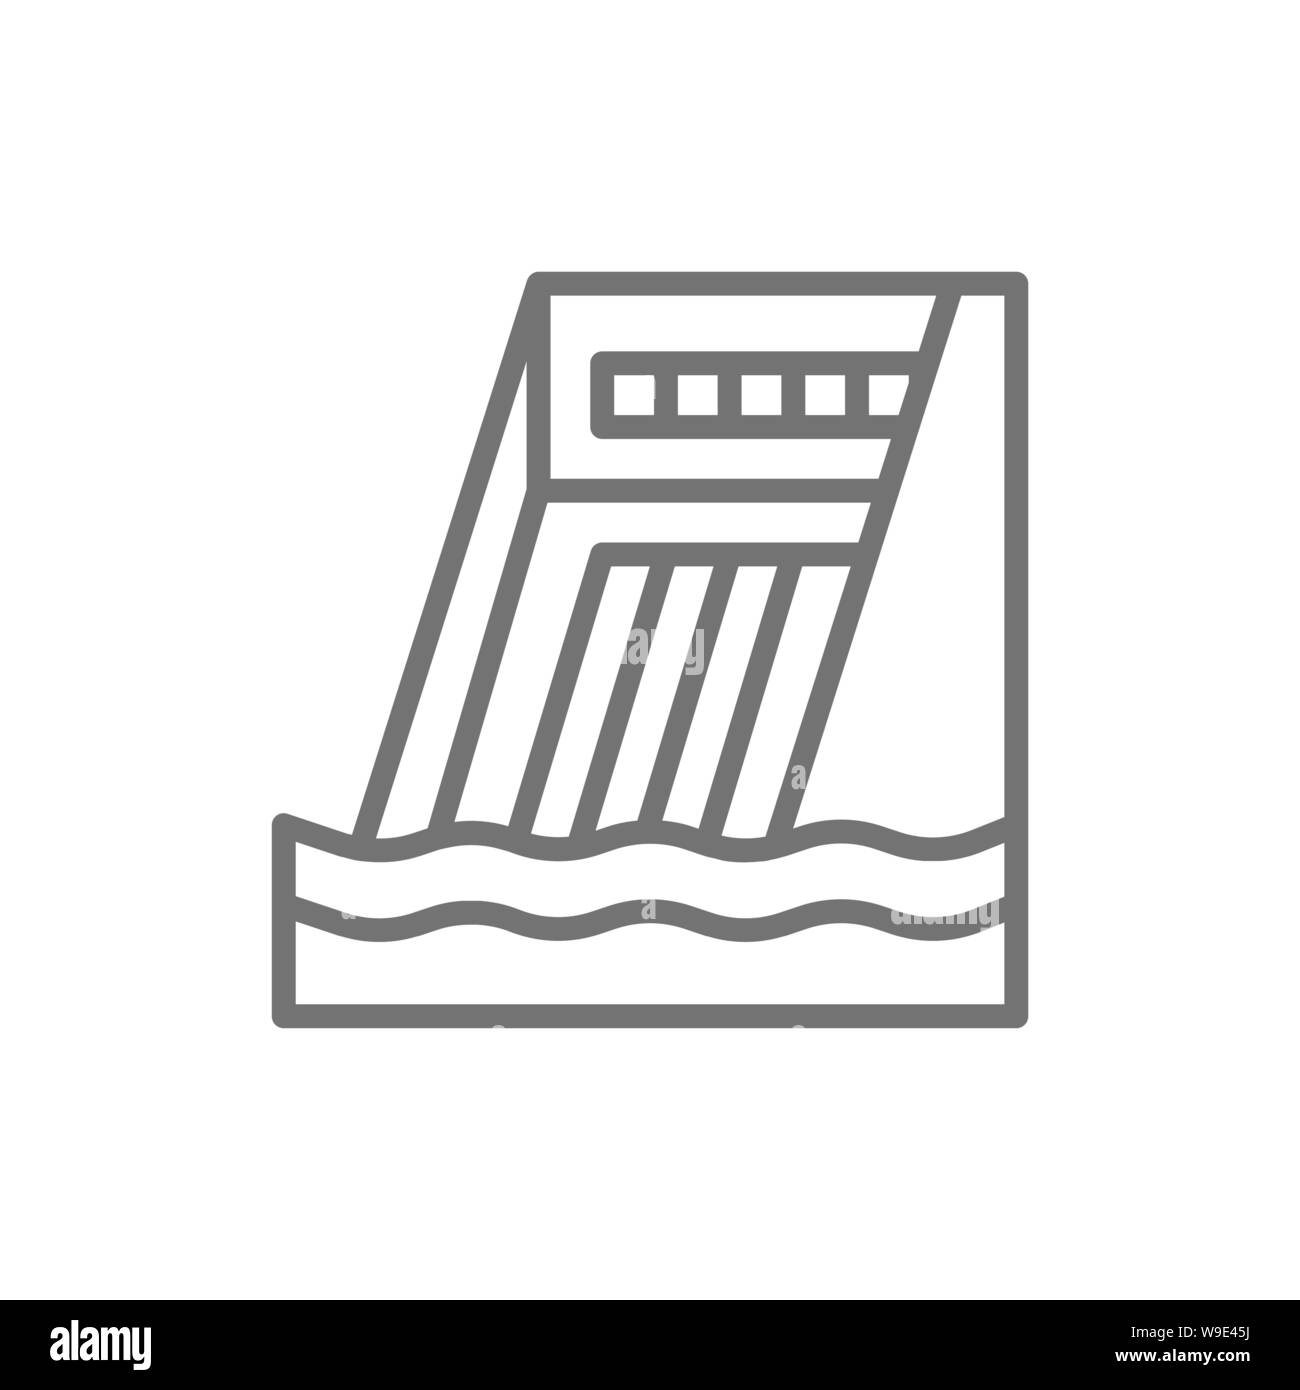 Water dam, hydro power plant, hydroelectric station line icon. Stock Vector